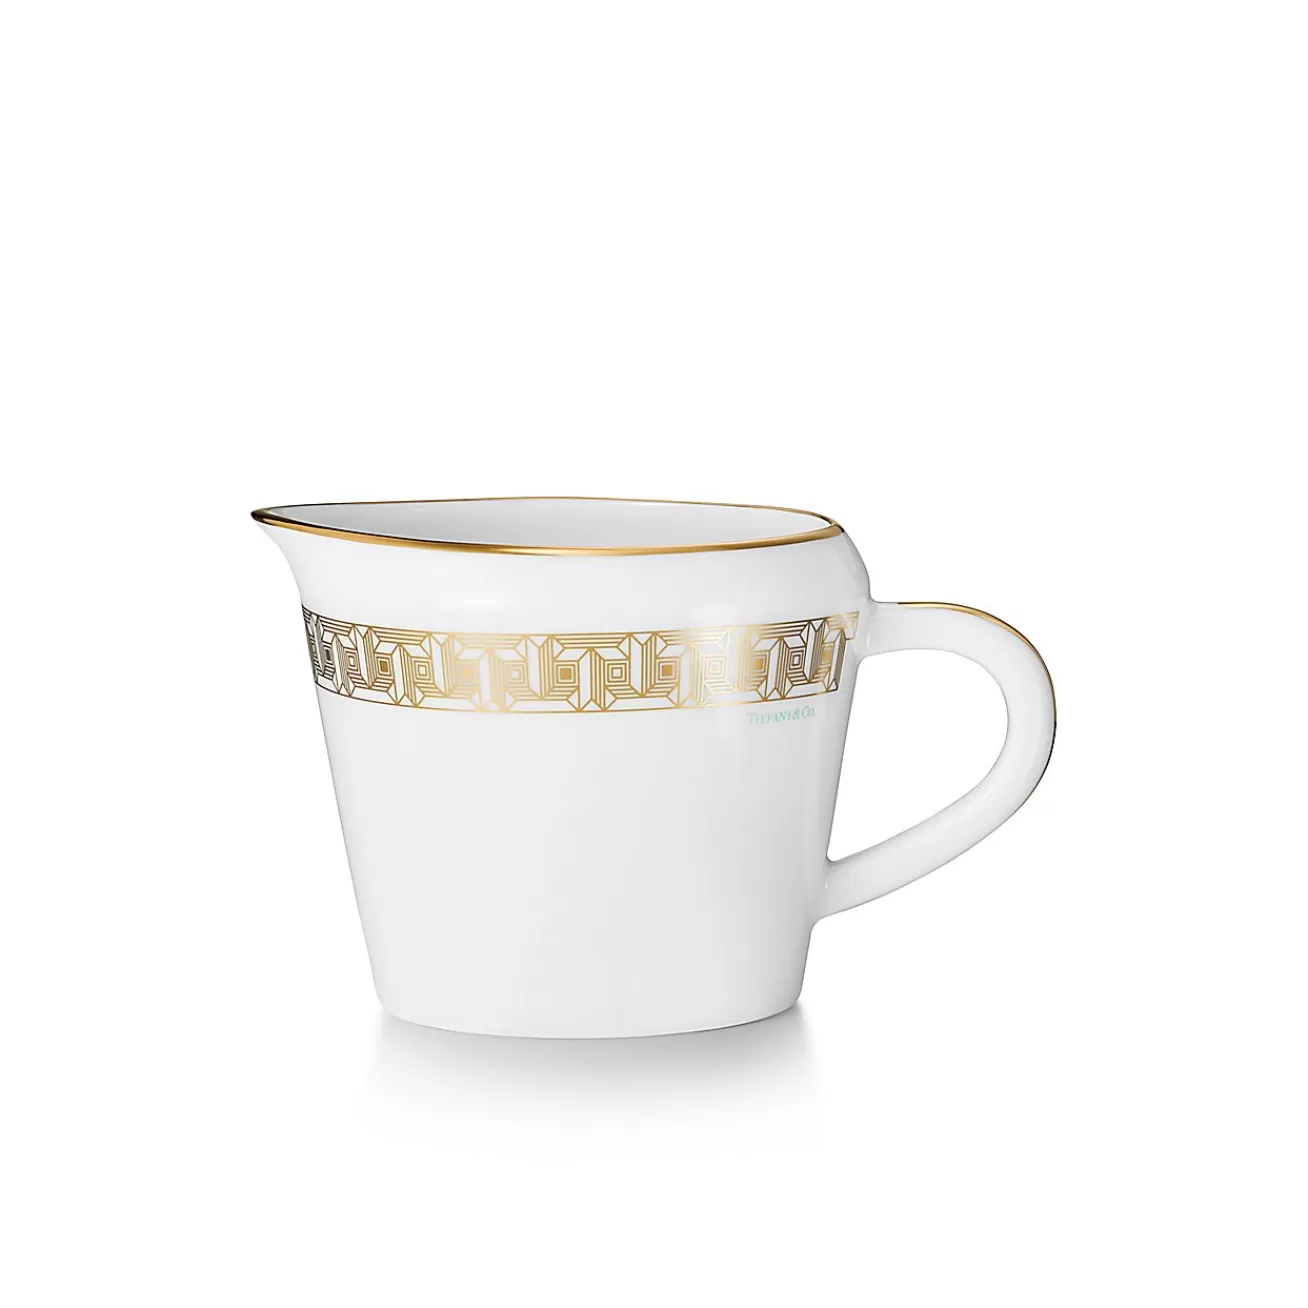 Tiffany & Co. Gold Tiffany T True Creamer with a Hand-painted Gold Rim | ^ Tableware | Coffee & Tea